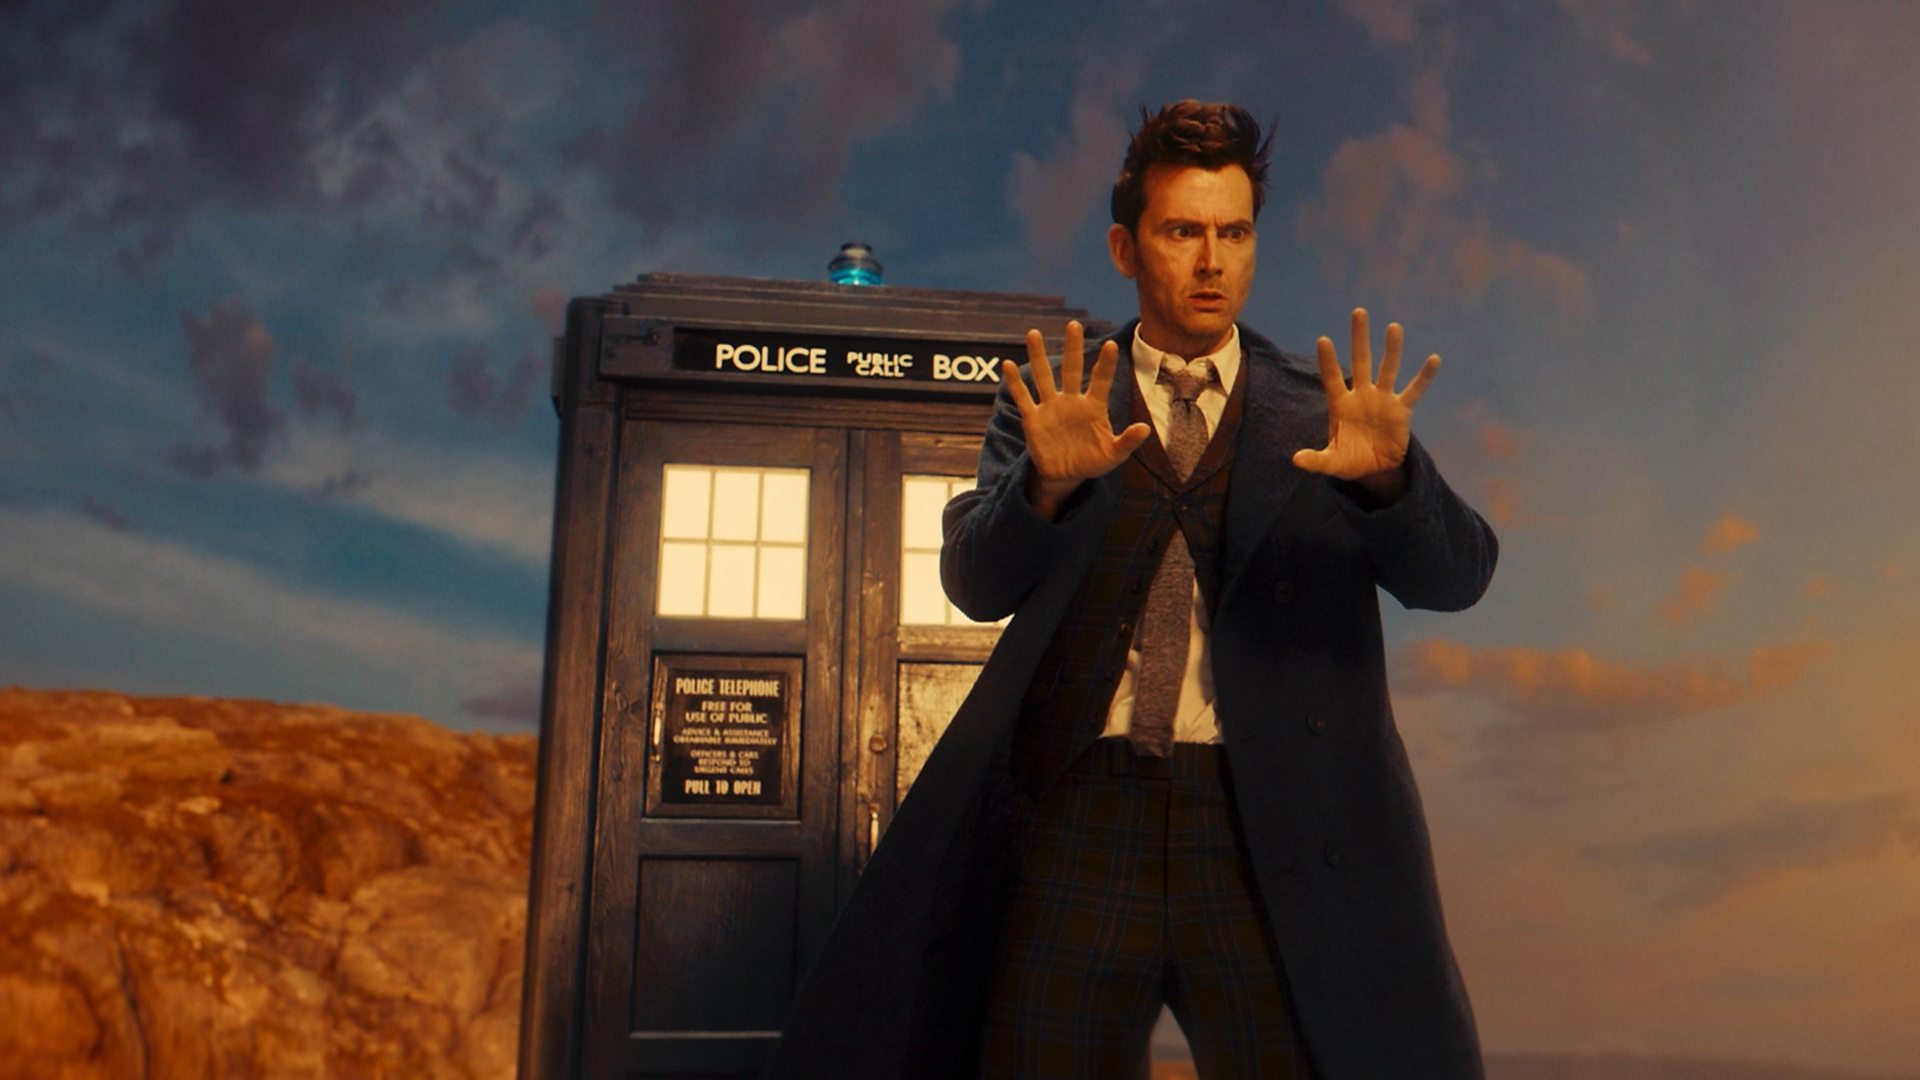 Doctor Who': David Tennant Confirmed as 14th Doctor